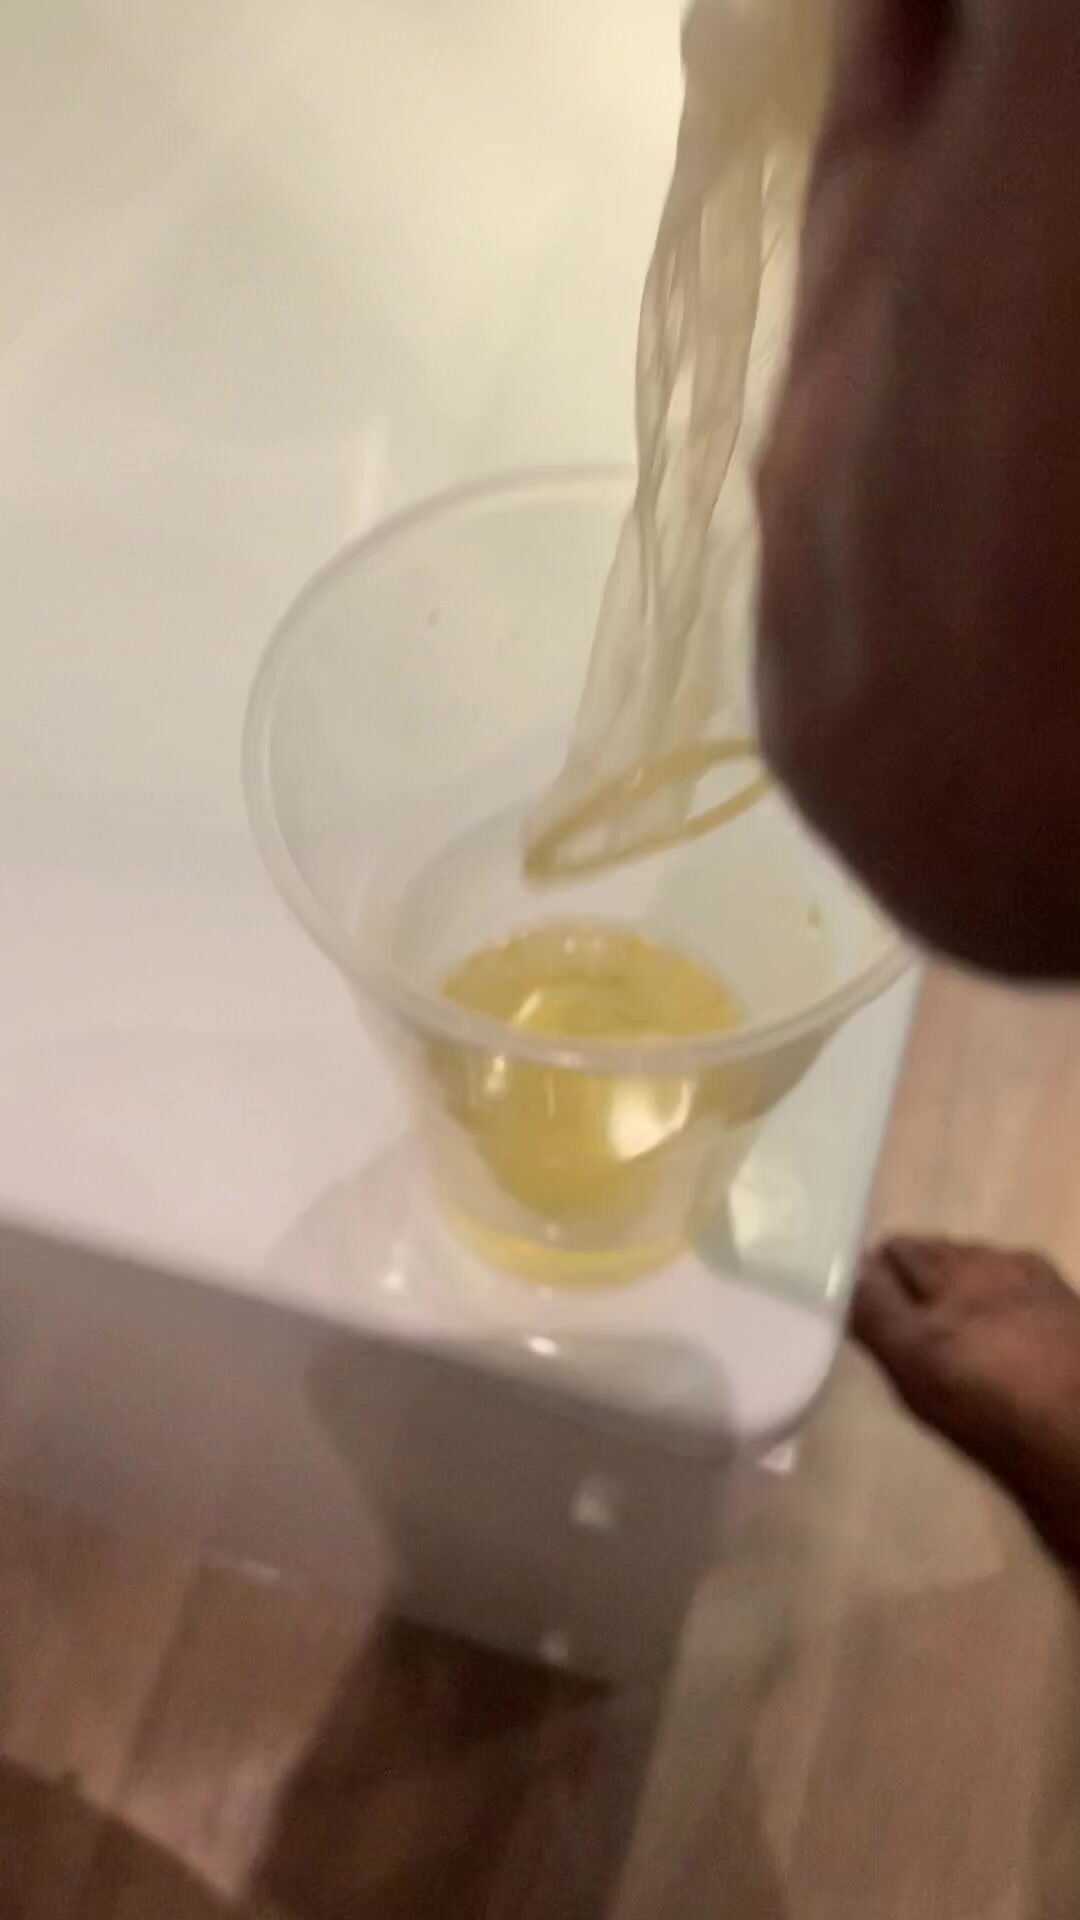 Black Dom alpha pour cum into his piss for me to drink